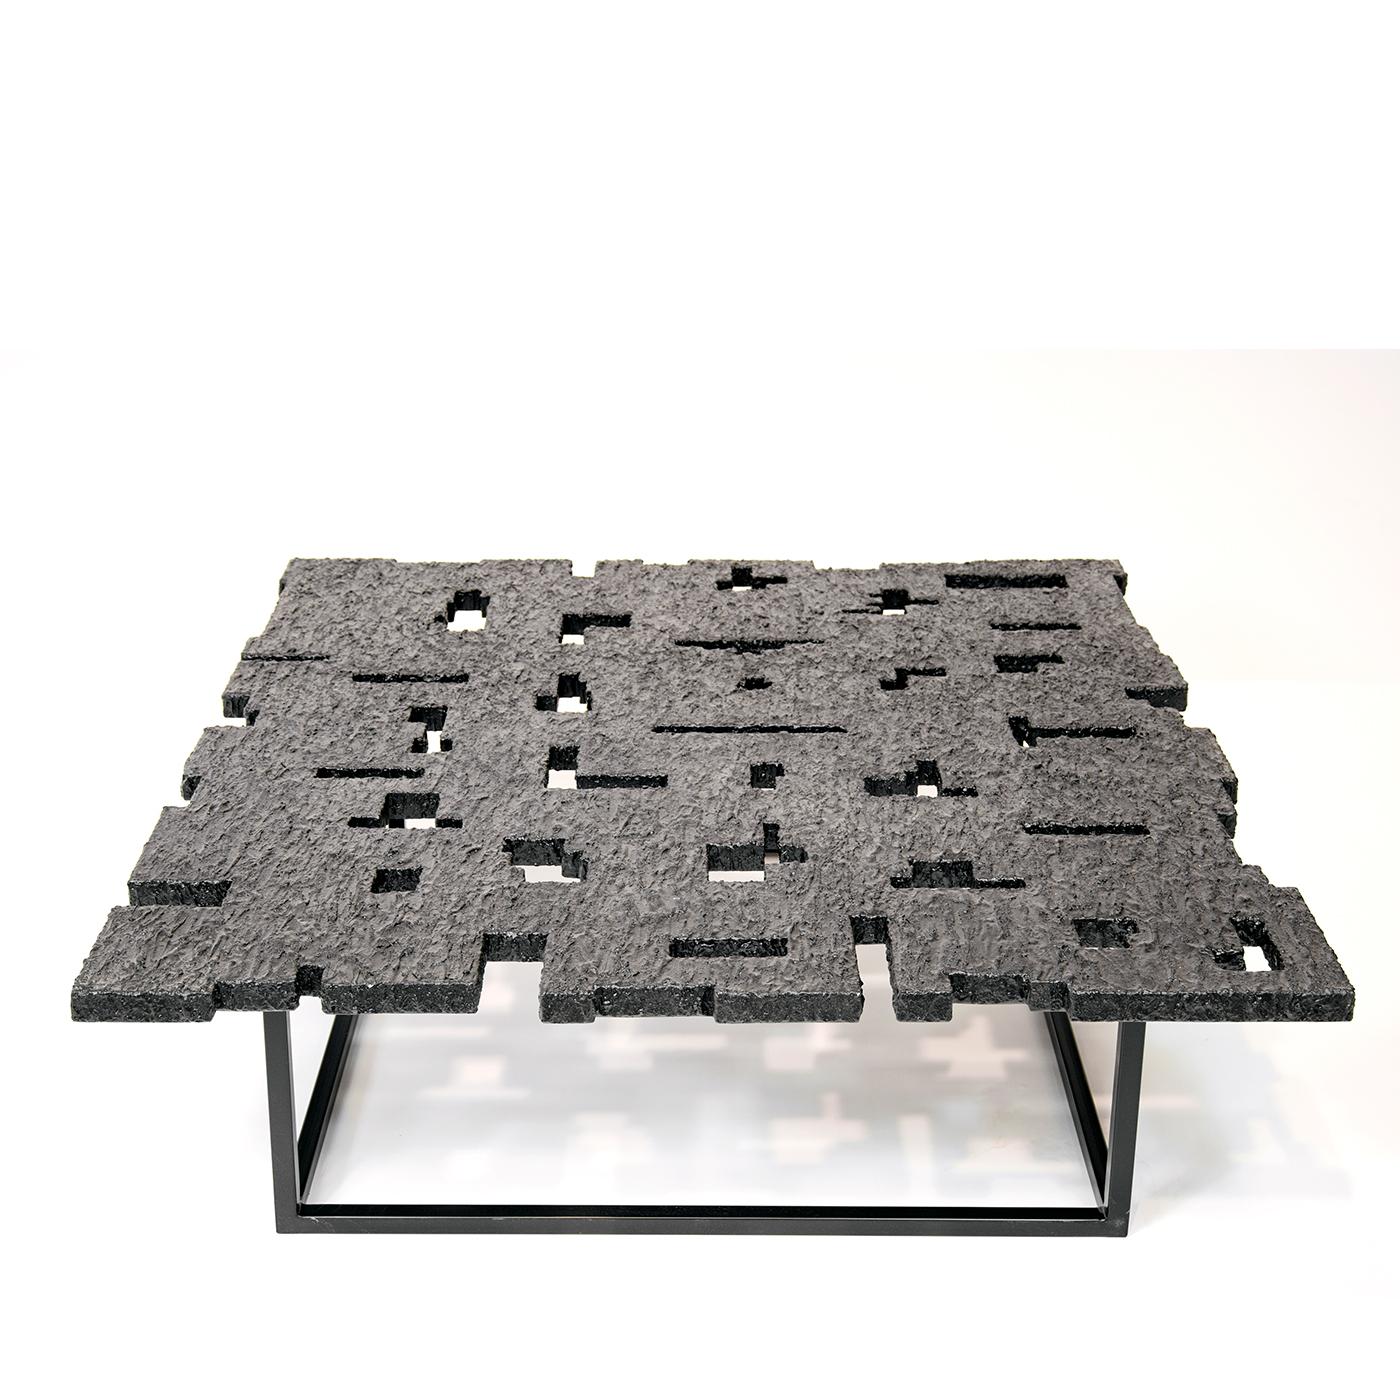 All elements of this coffee table convey a dramatic visual effect that will suit a contemporary and eclectic interior decor. Entirely finished in deep black, the open tubular steel base showcases the top made of wood blocks, arranged in an irregular